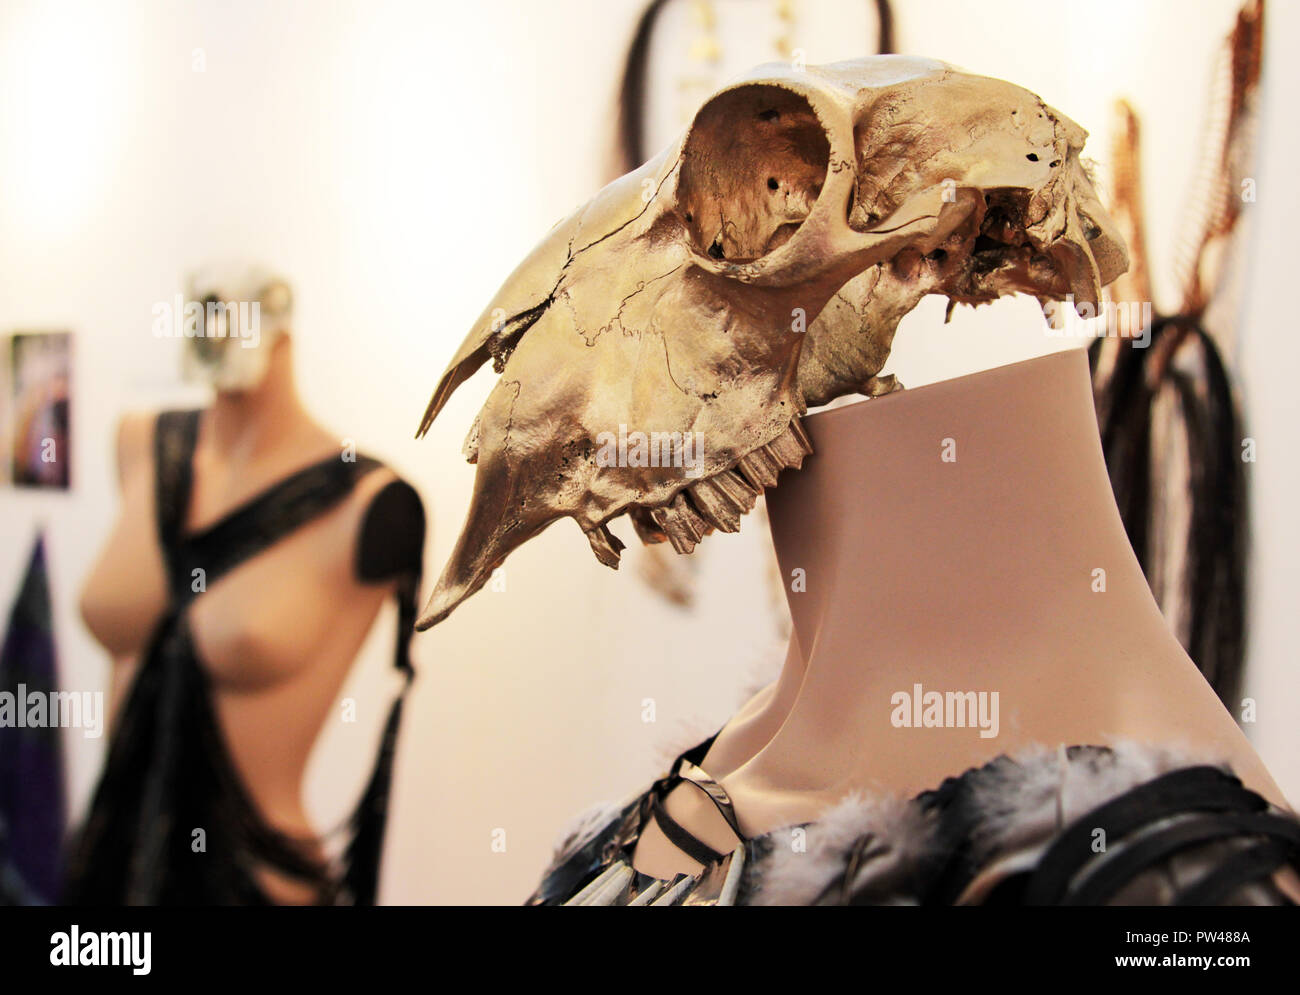 A dubious marriage of art and fashion involving a birds head skeleton and a fashion mannequin as used by a seamstress at an Arts degree show. Stock Photo